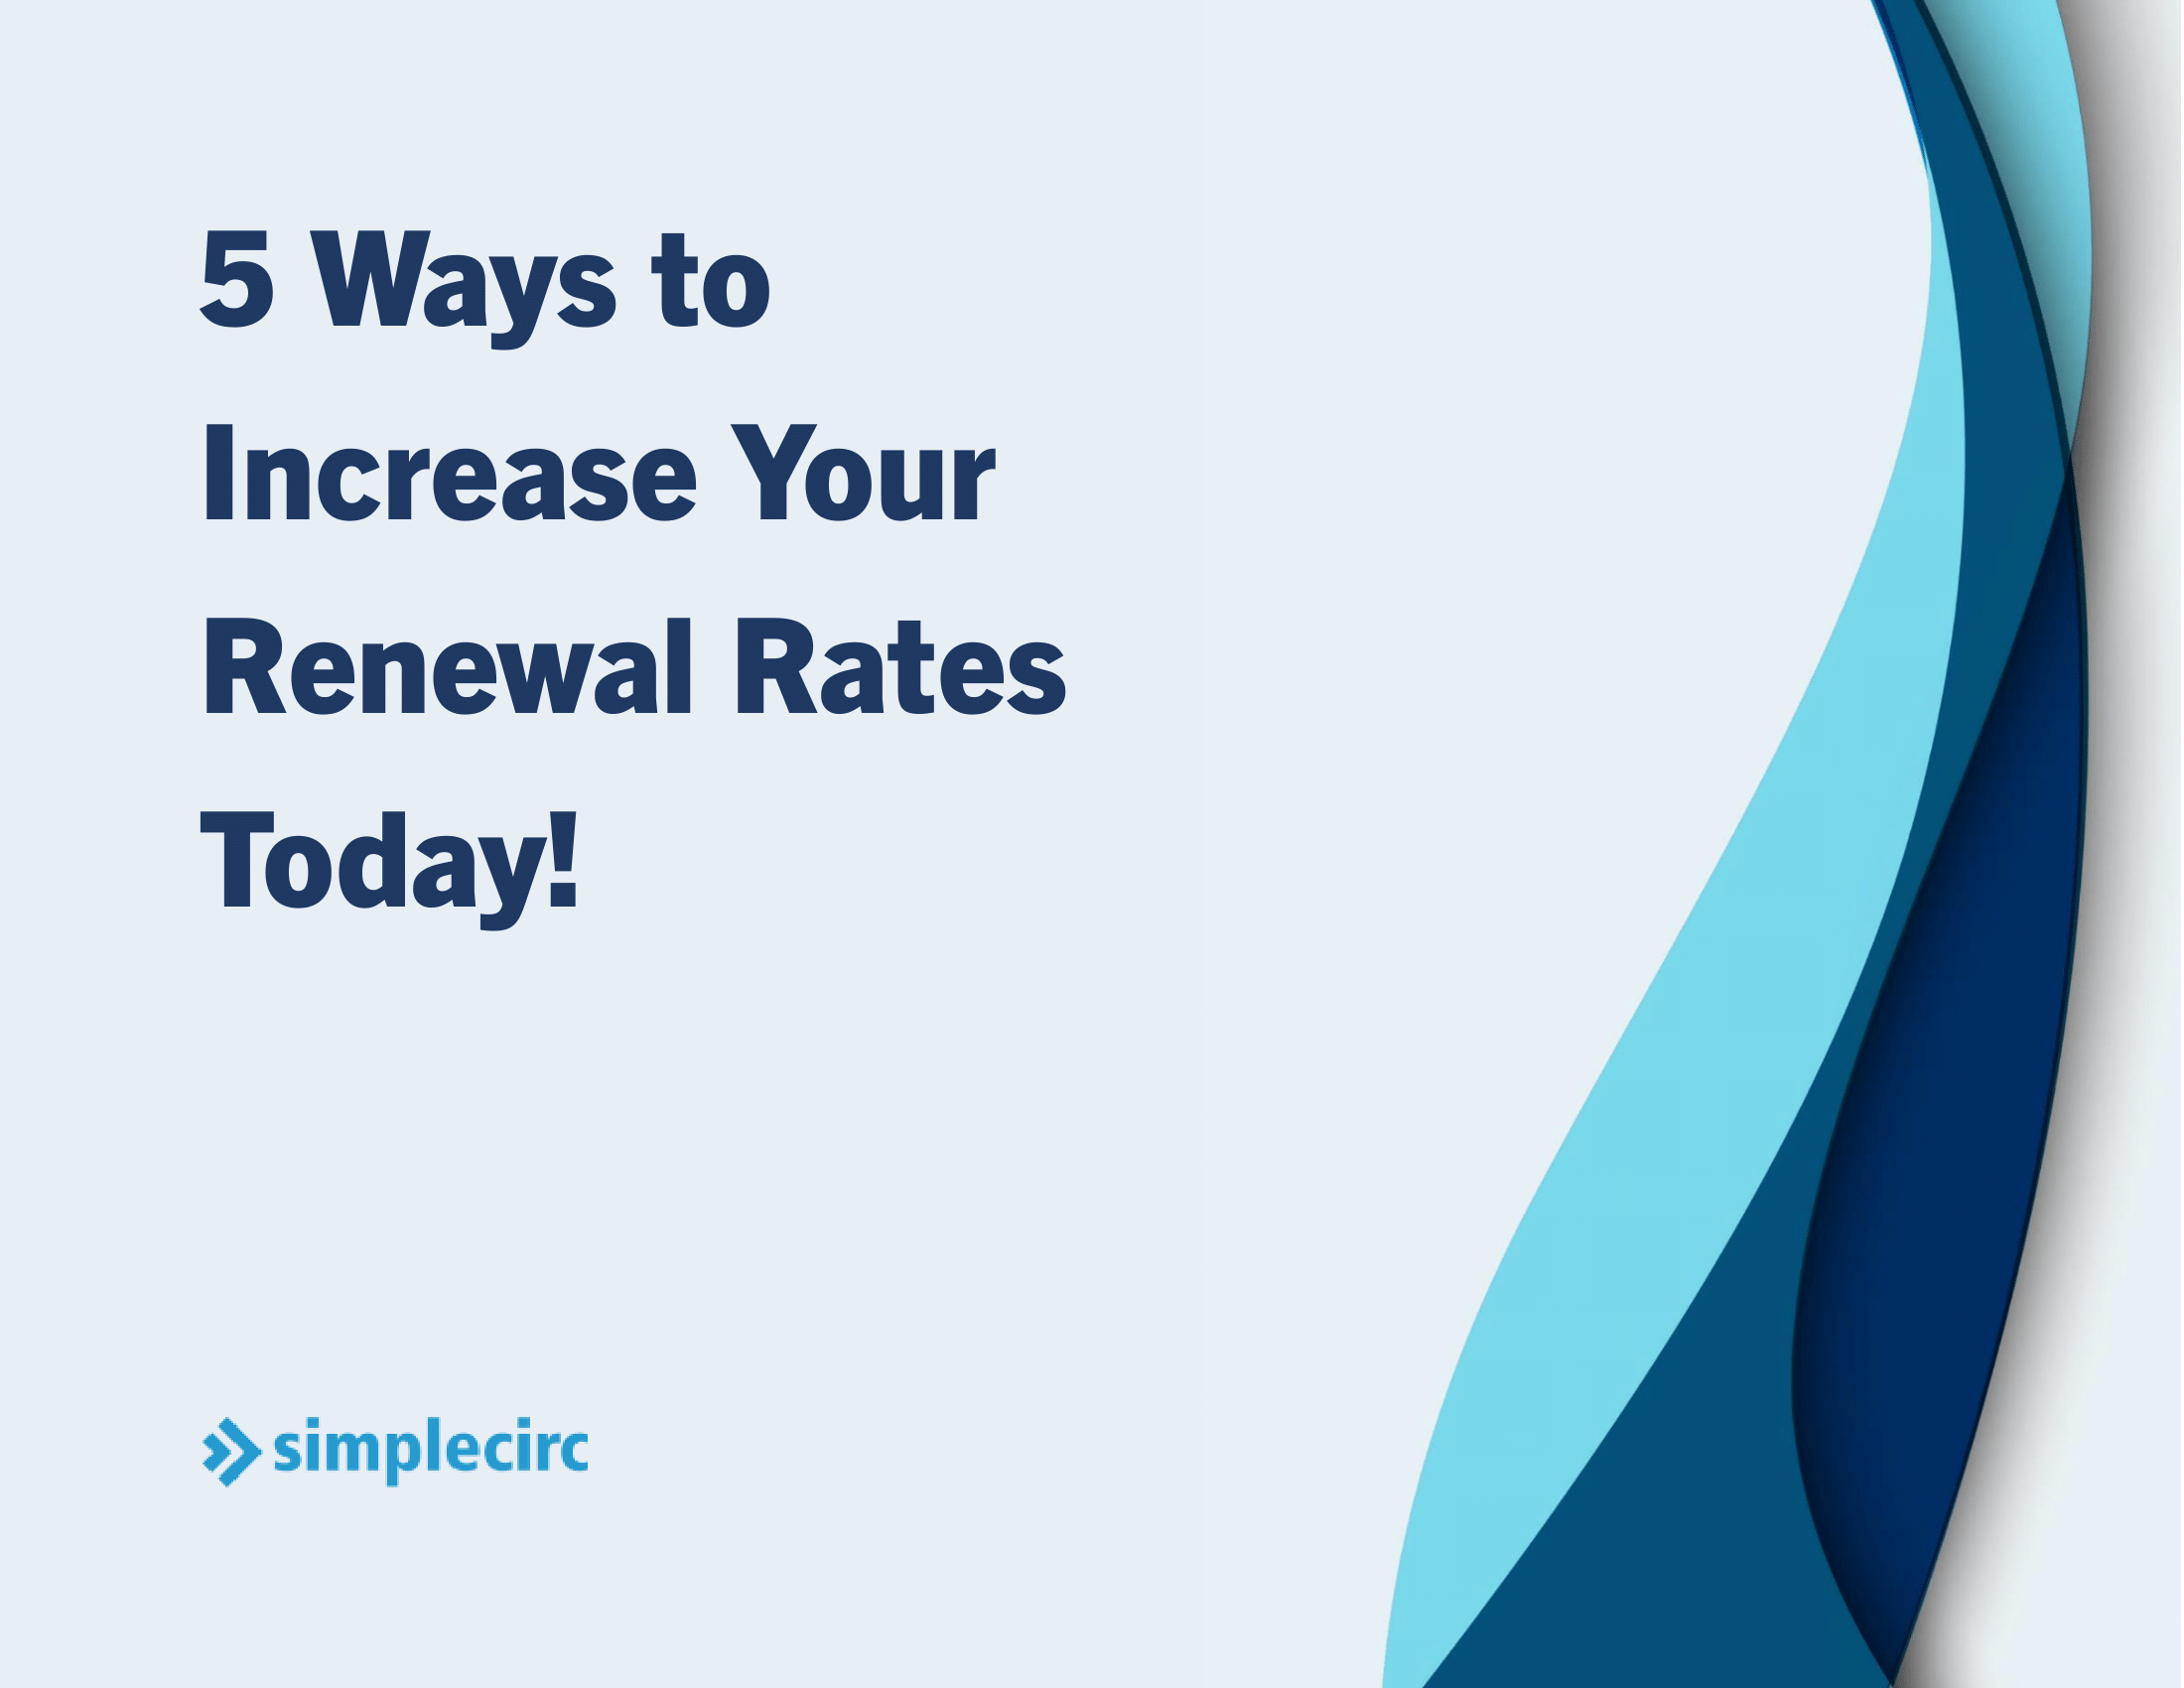 5 Ways to Increase Your Renewal Rates Today eBook from SimpleCirc